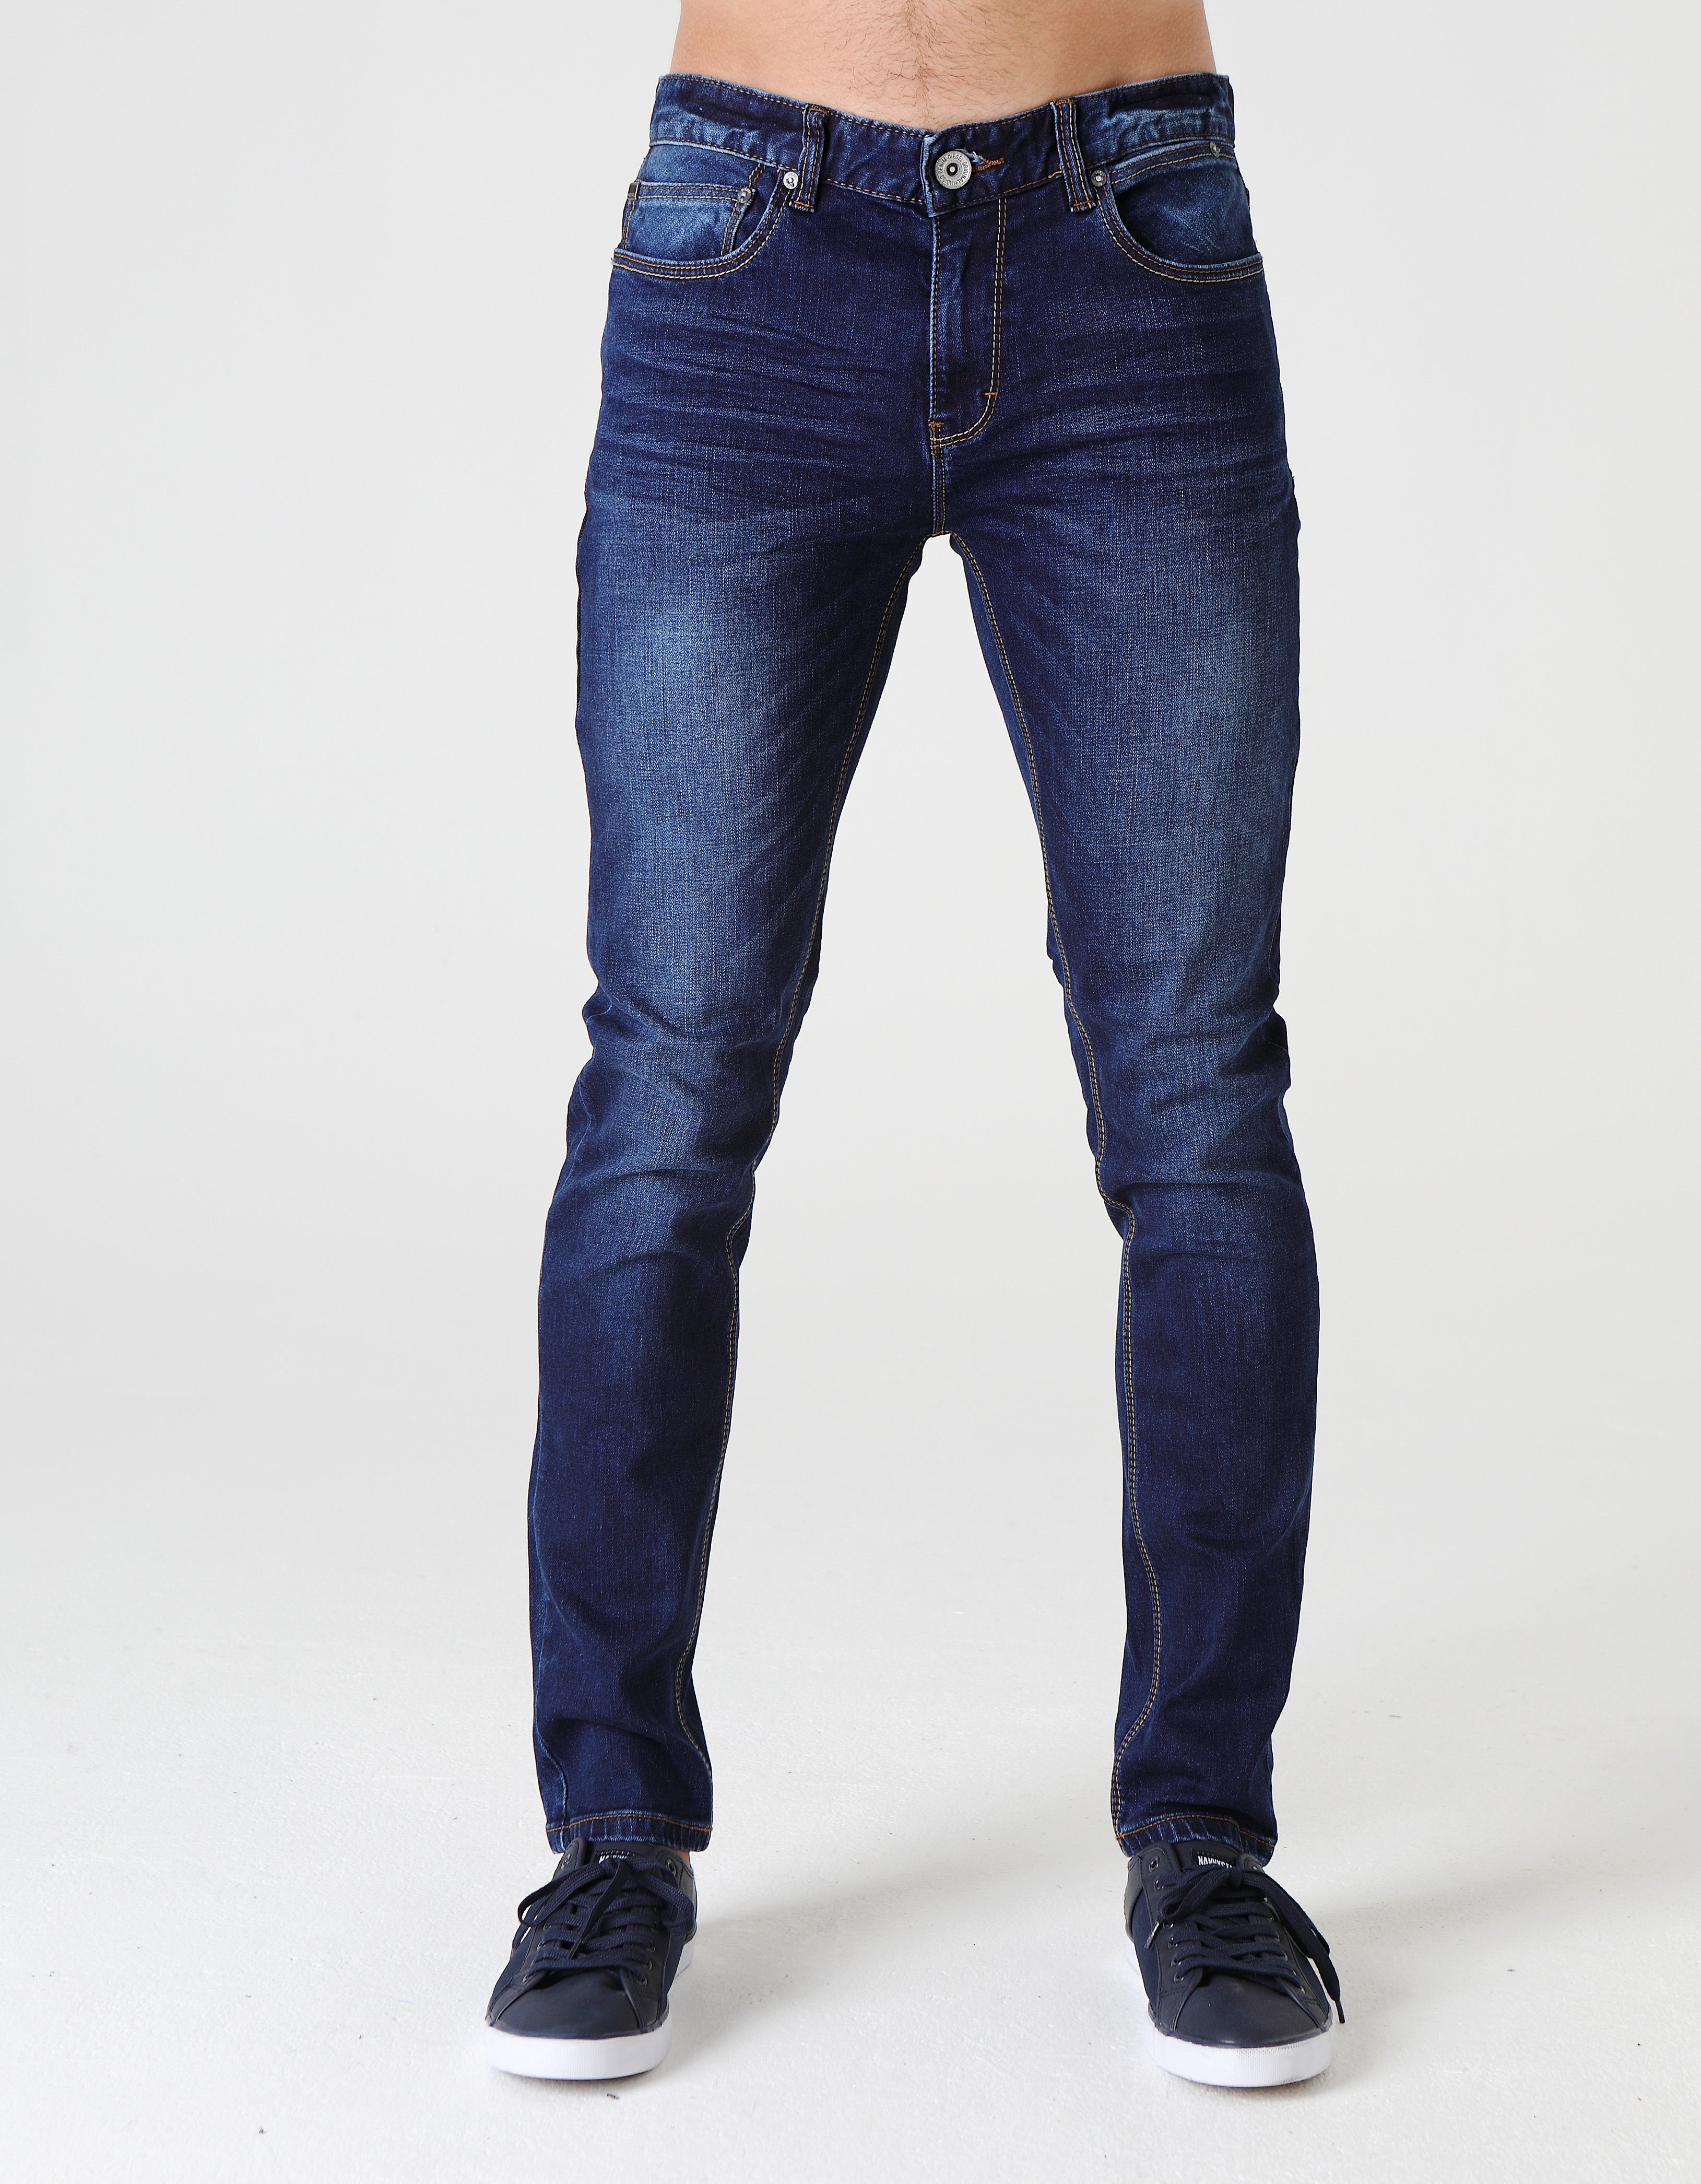 hipster style jeans